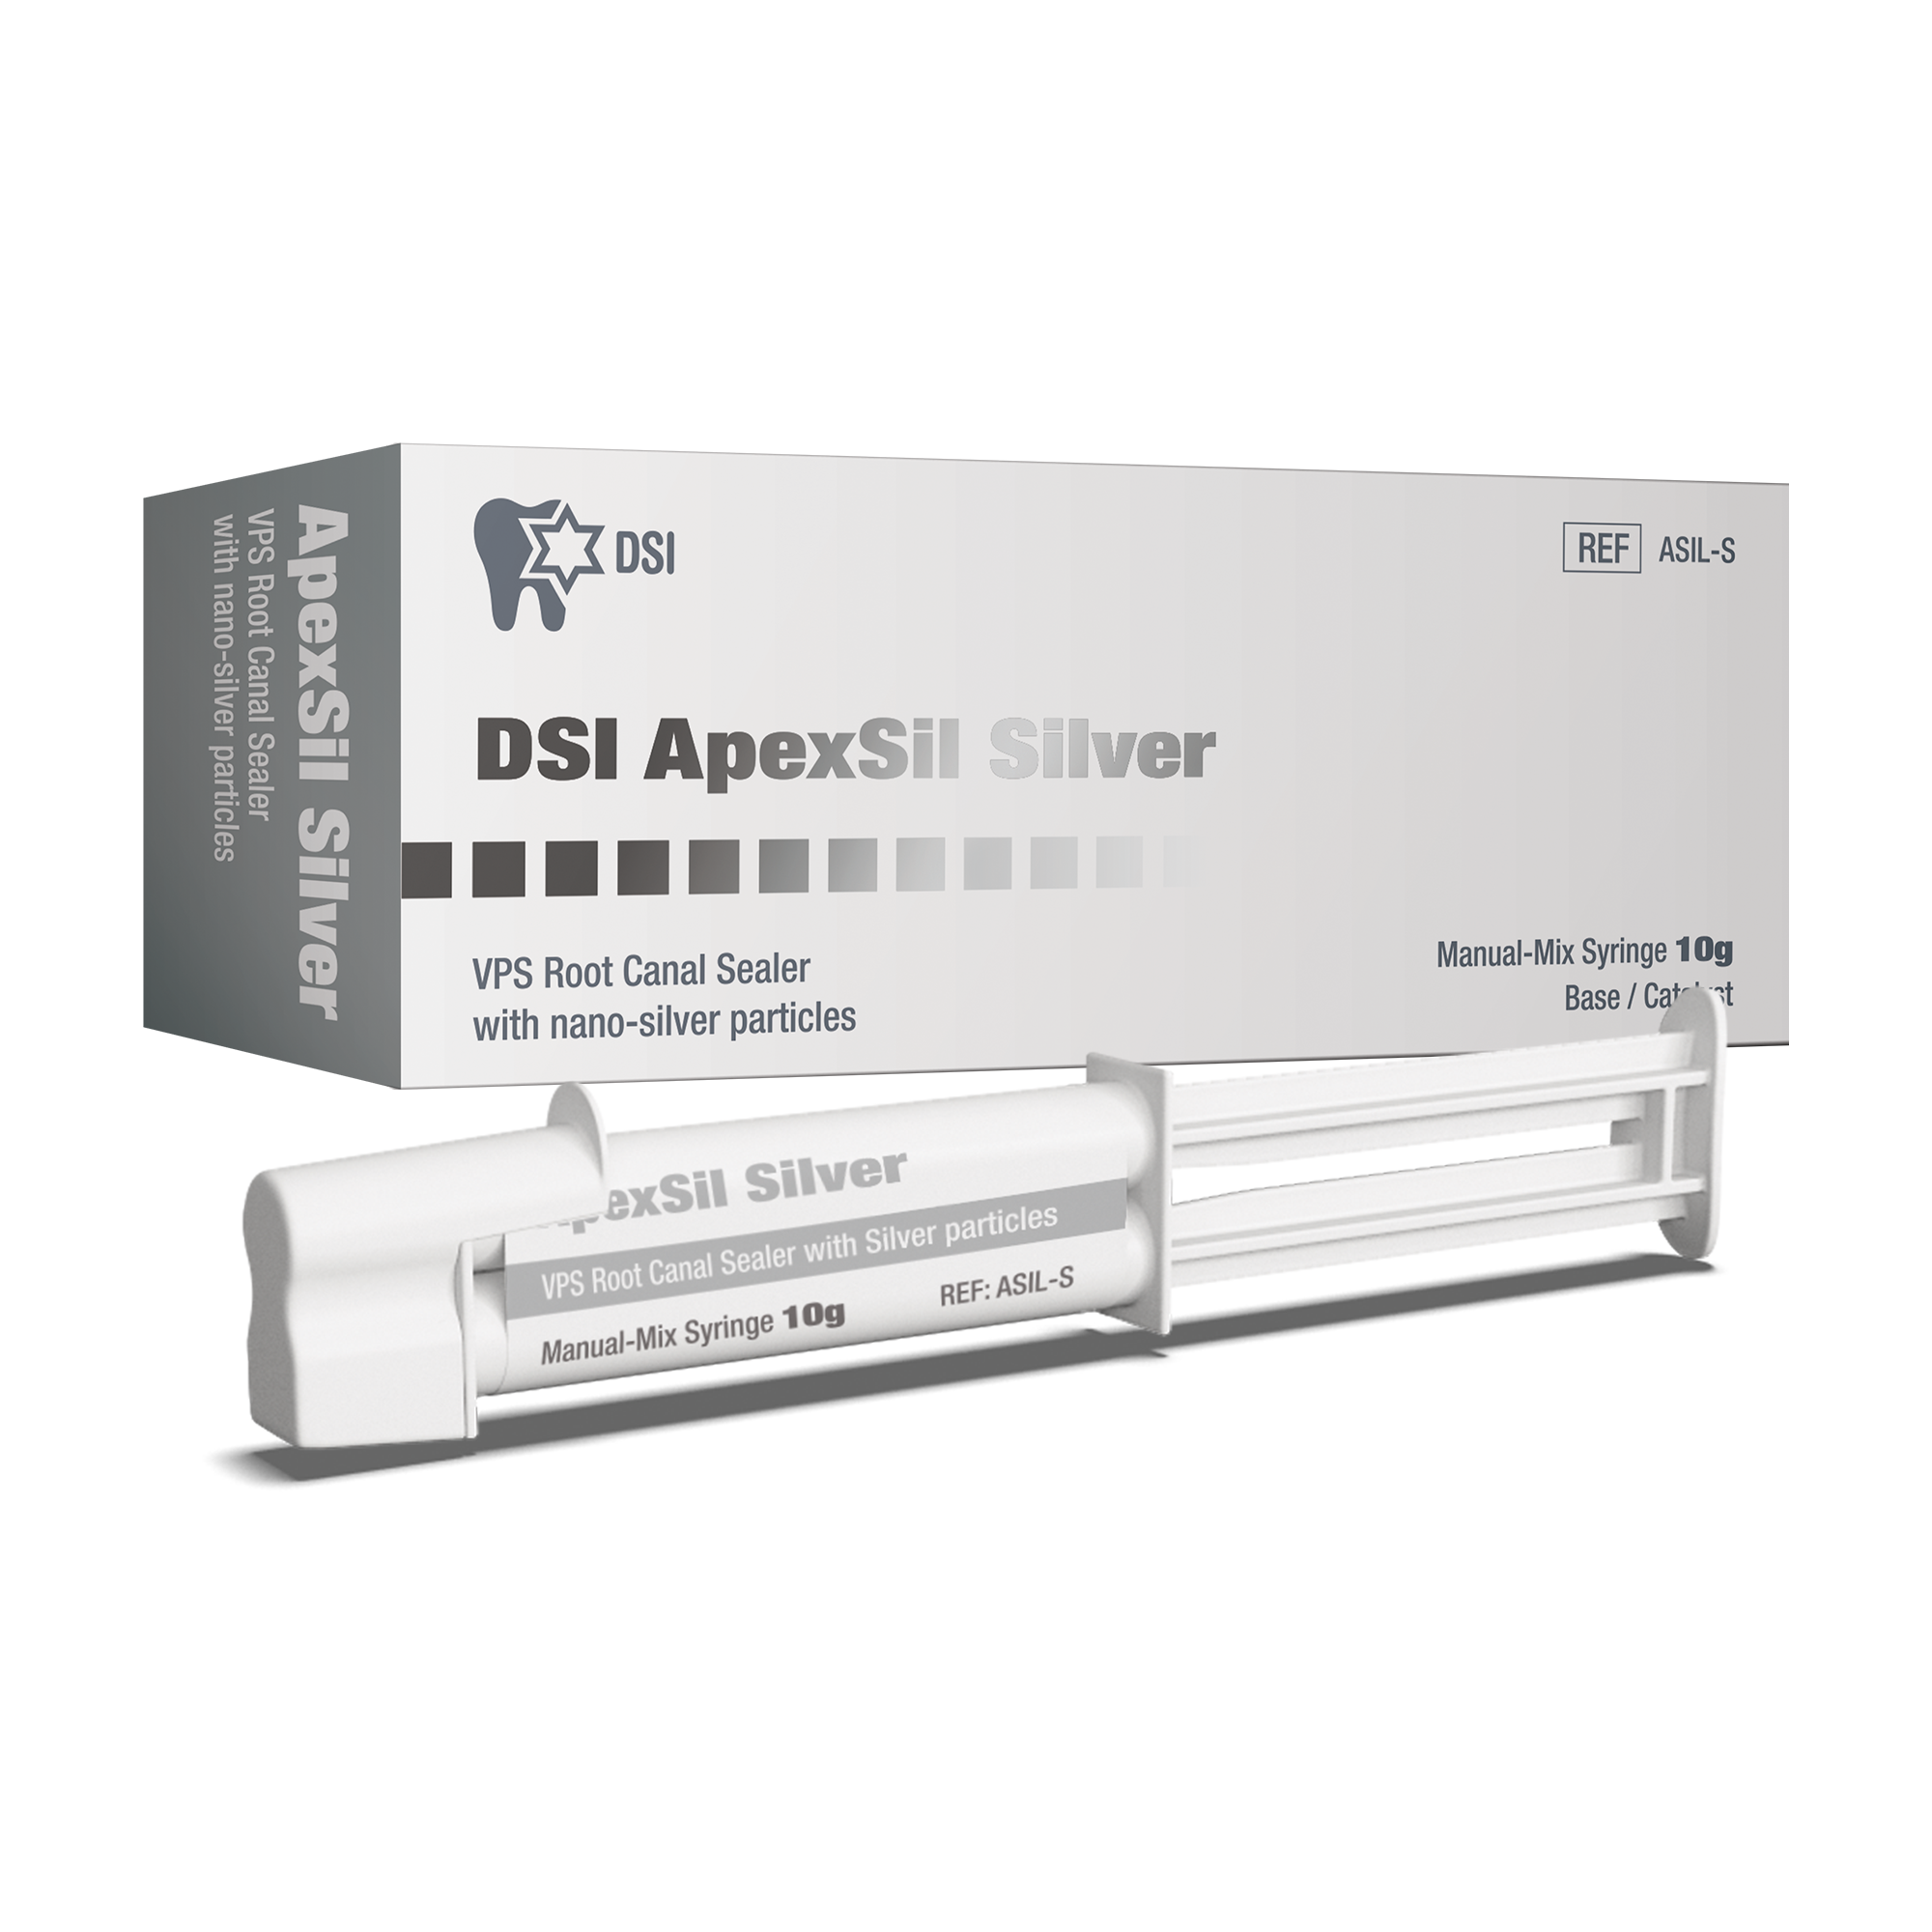 DSI Apexsil Silver Liquid Gutta Root Canal Sealer with nano-silver particles 10g